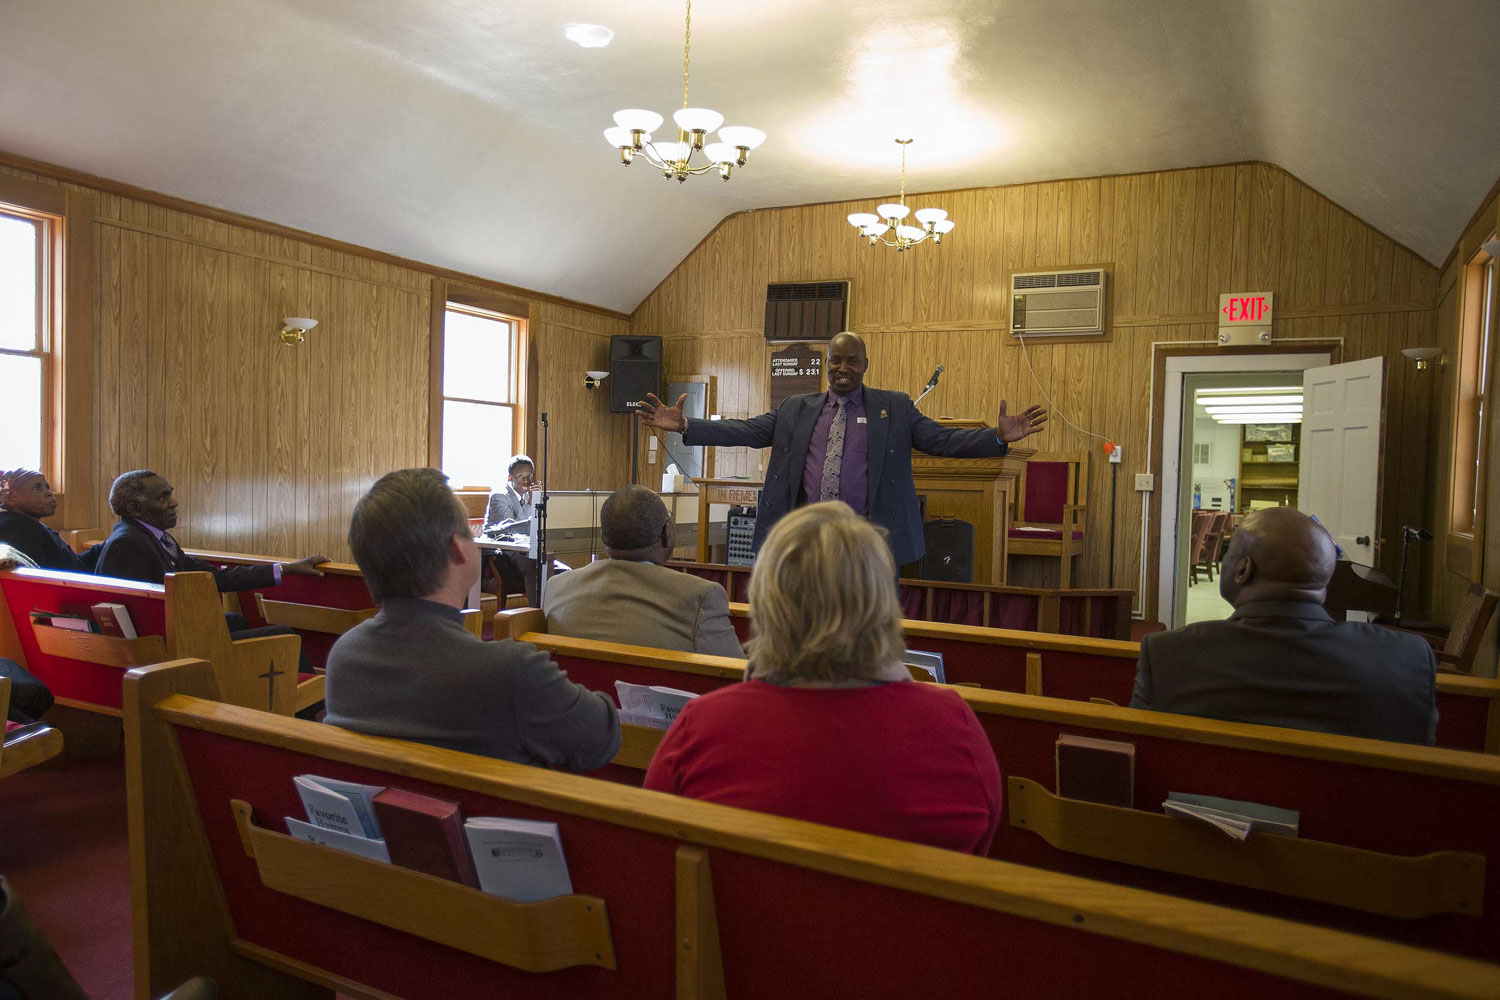 Chege preaches at Lighthouse Baptist Church in Barboursville